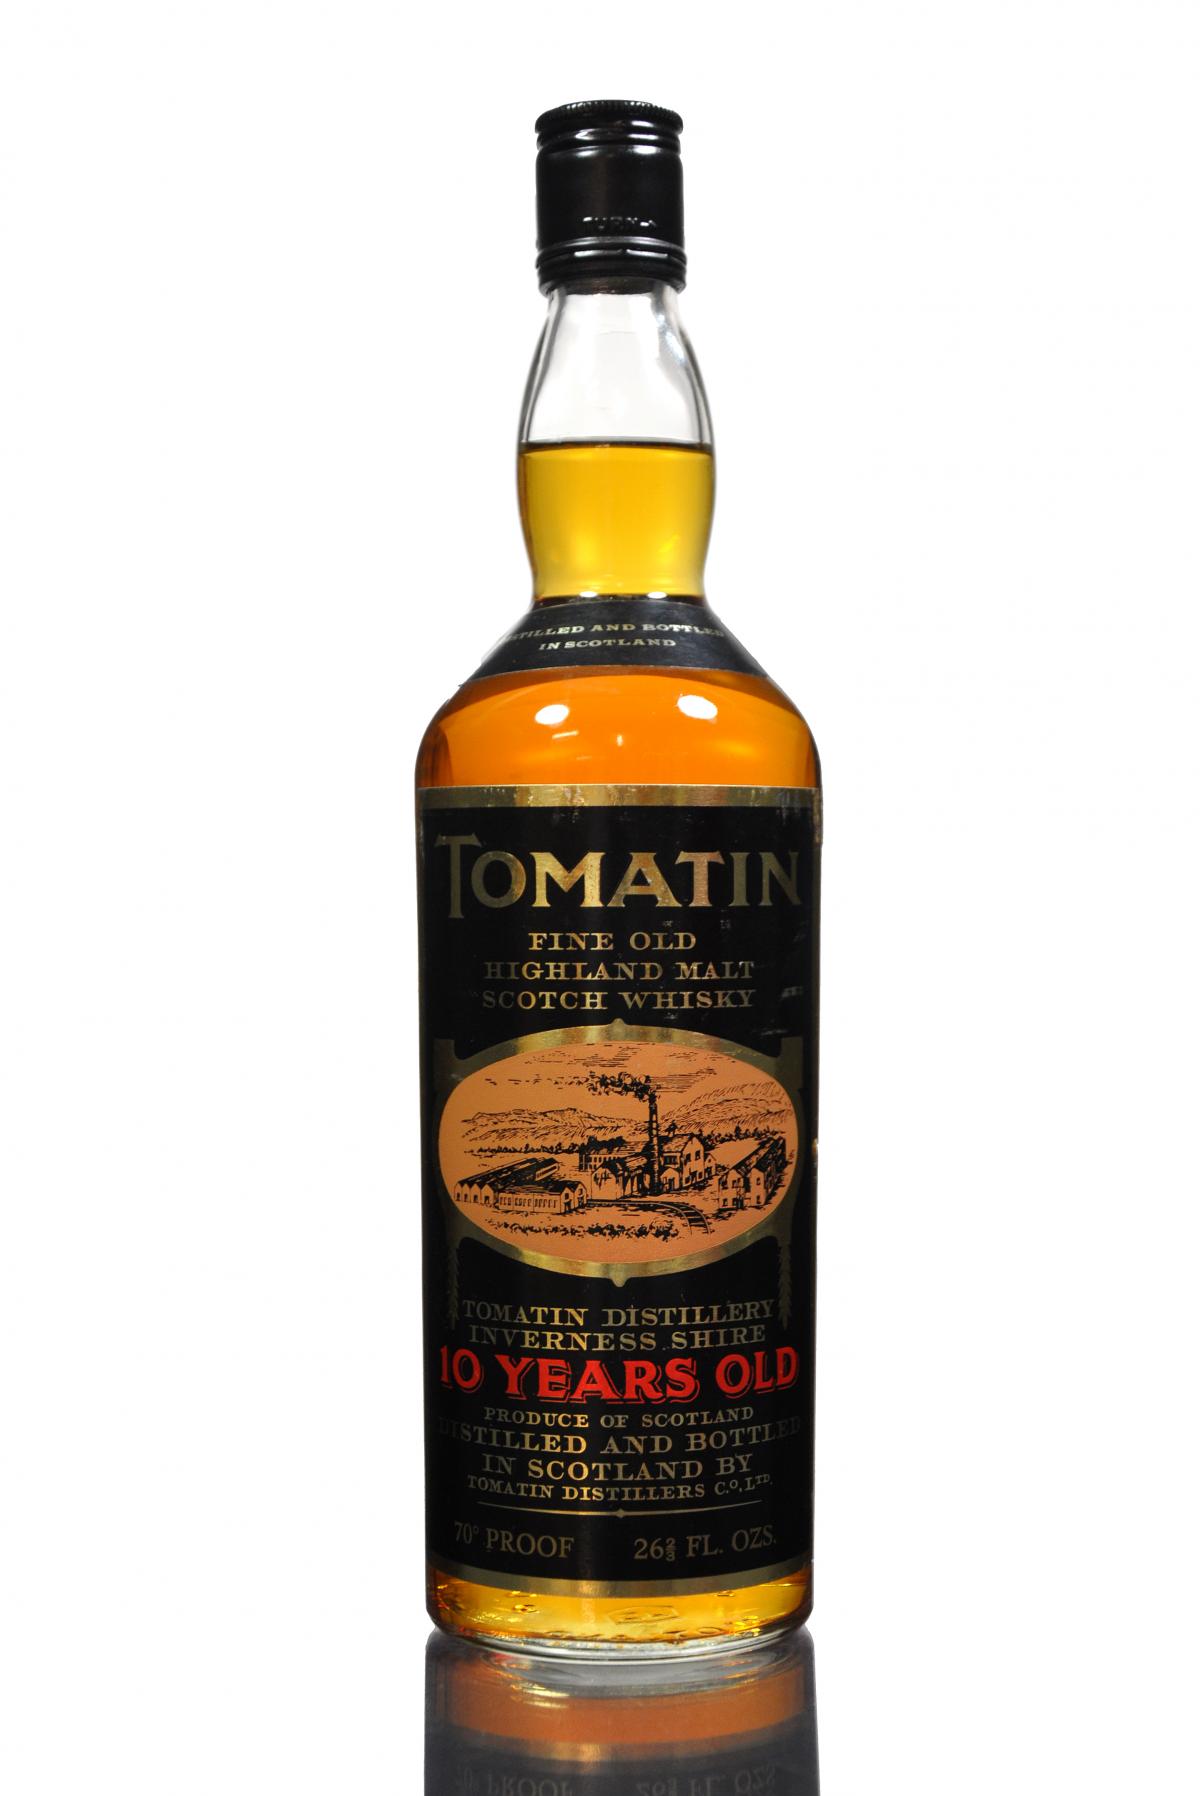 Tomatin 10 Year Old - 1970s